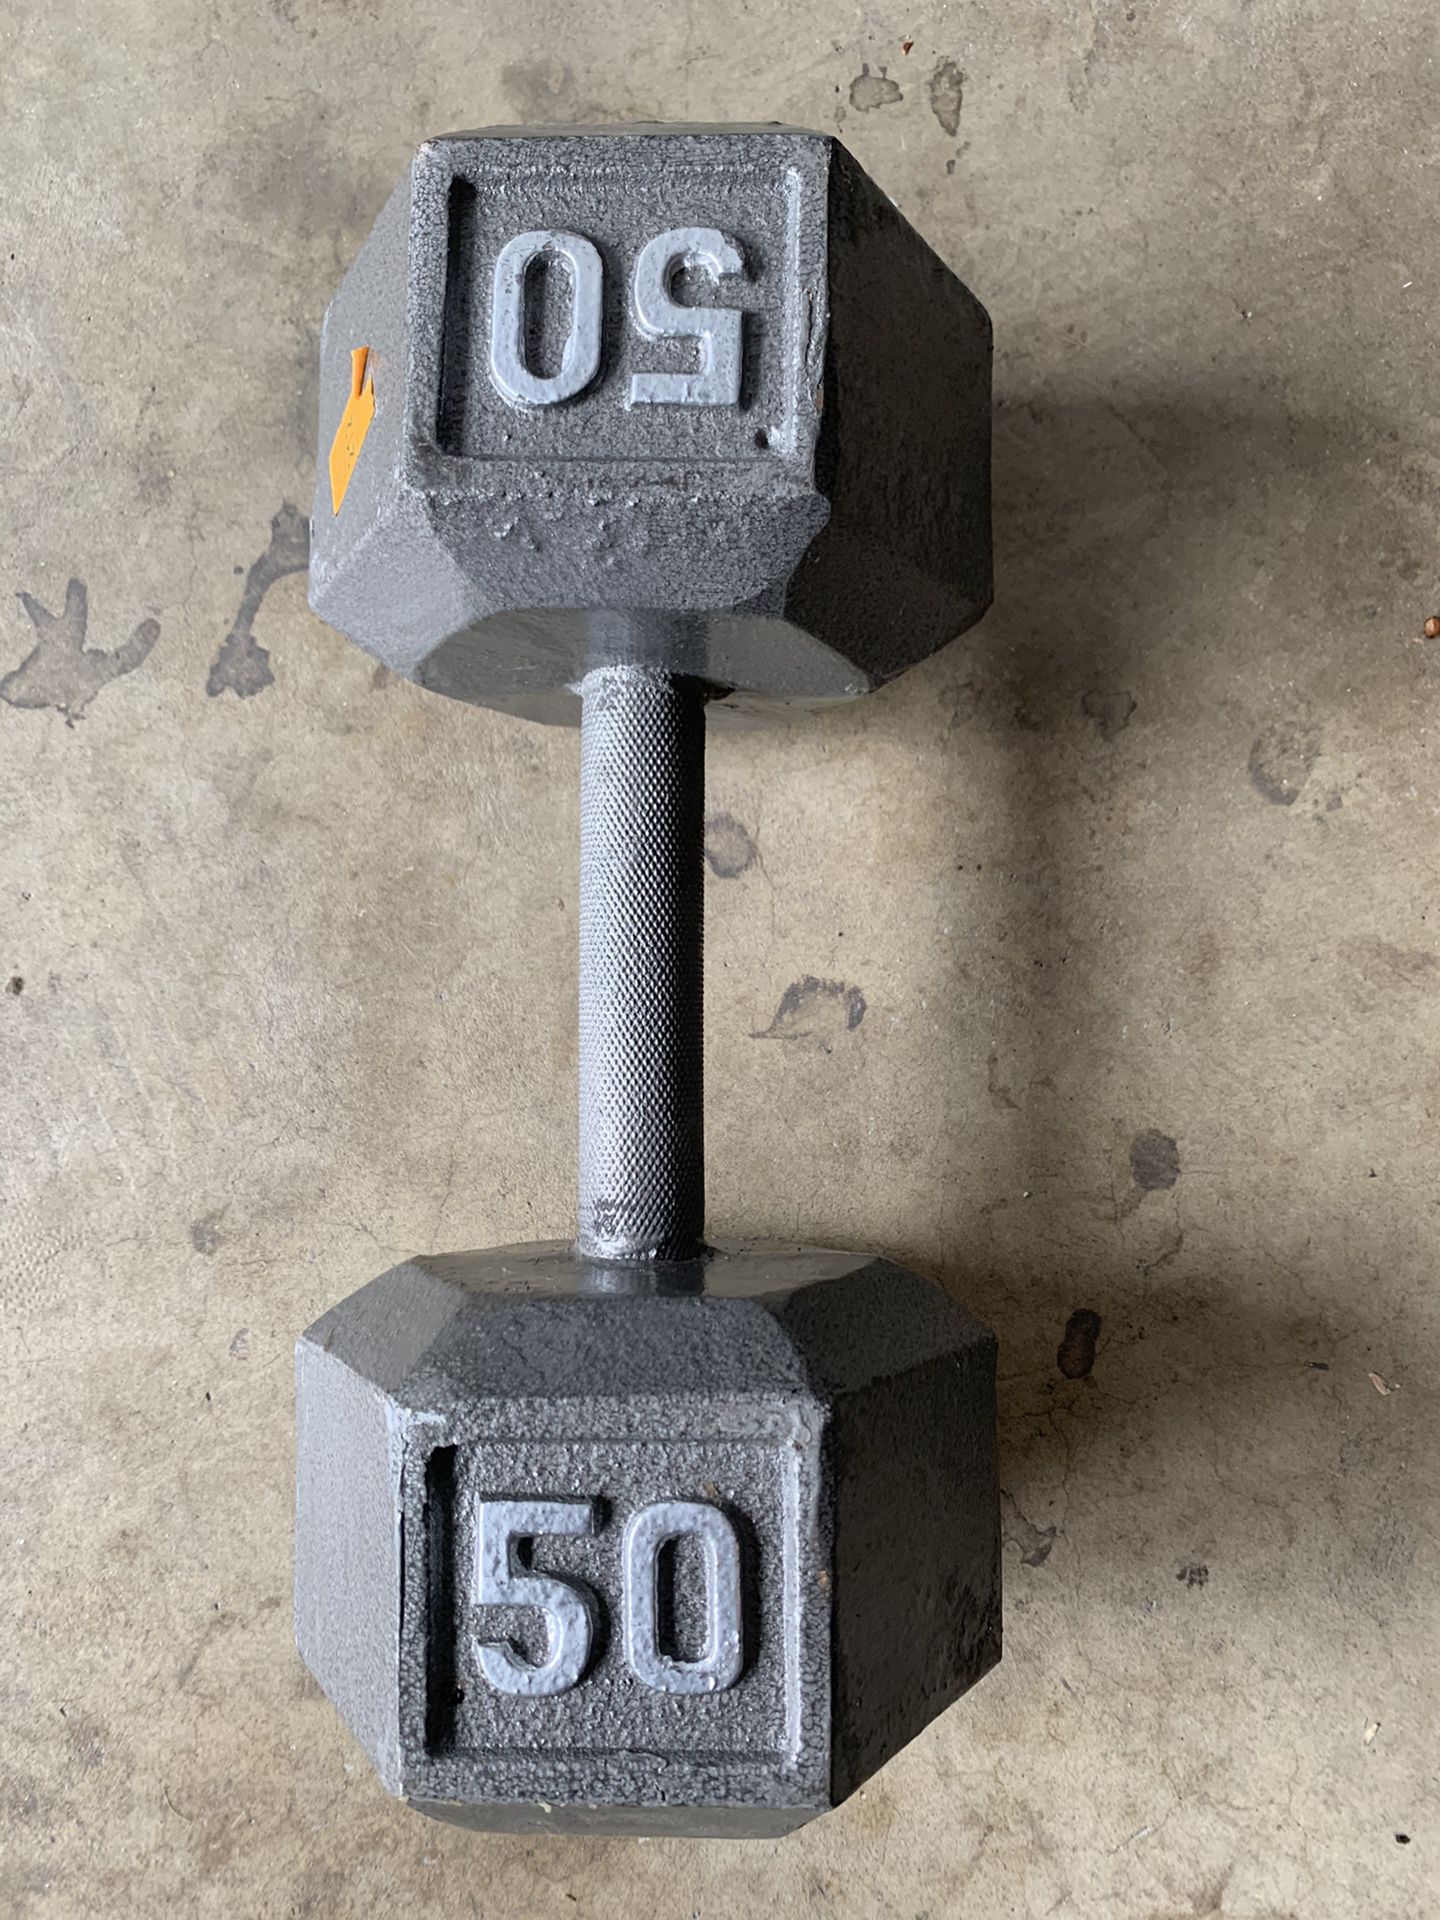 Dumbbell weight 50 lbs